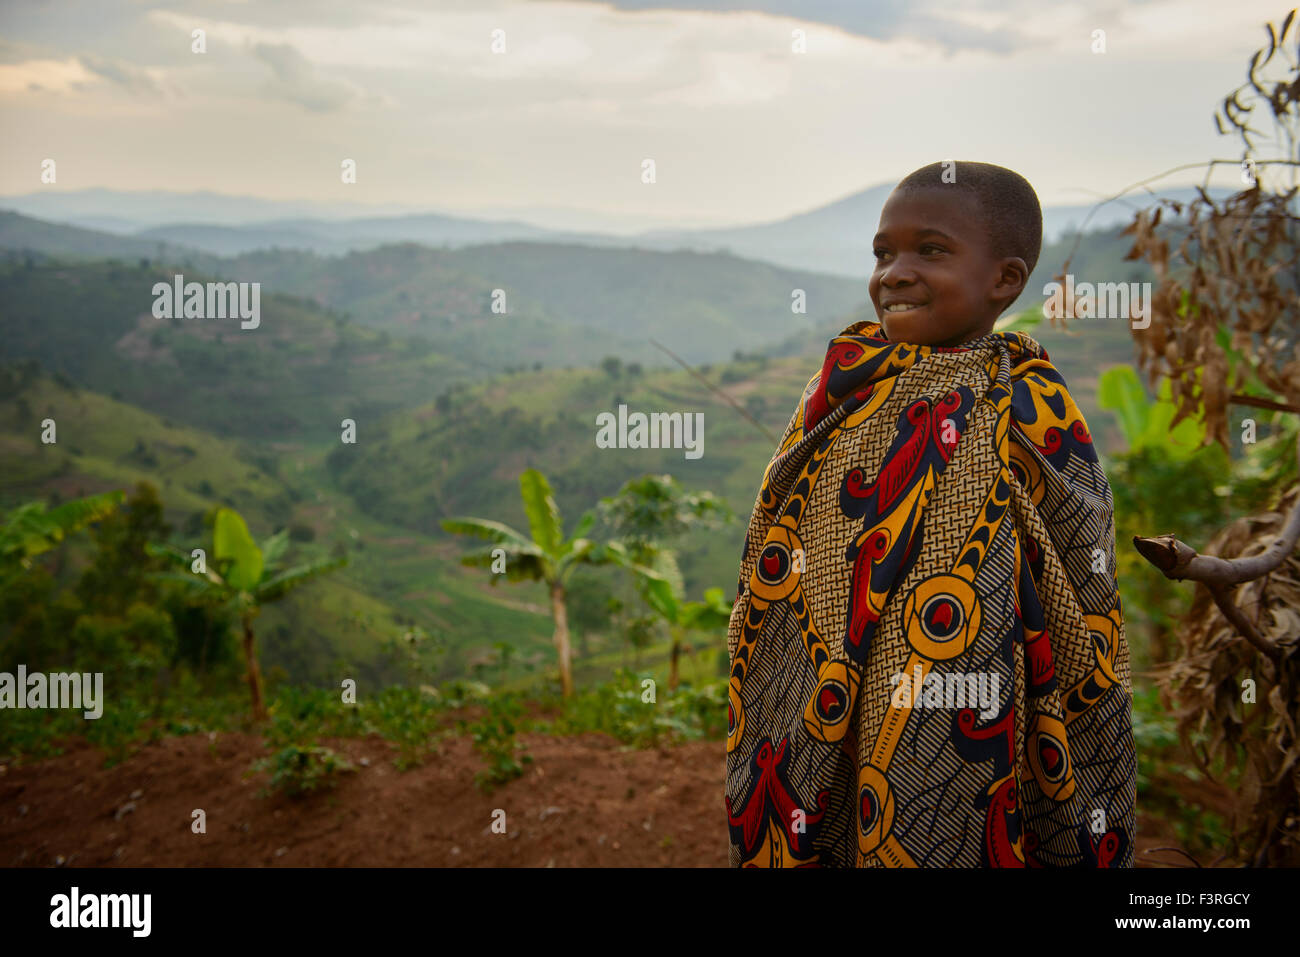 Boy in traditional clothes, Southern Rwanda, Africa Stock Photo